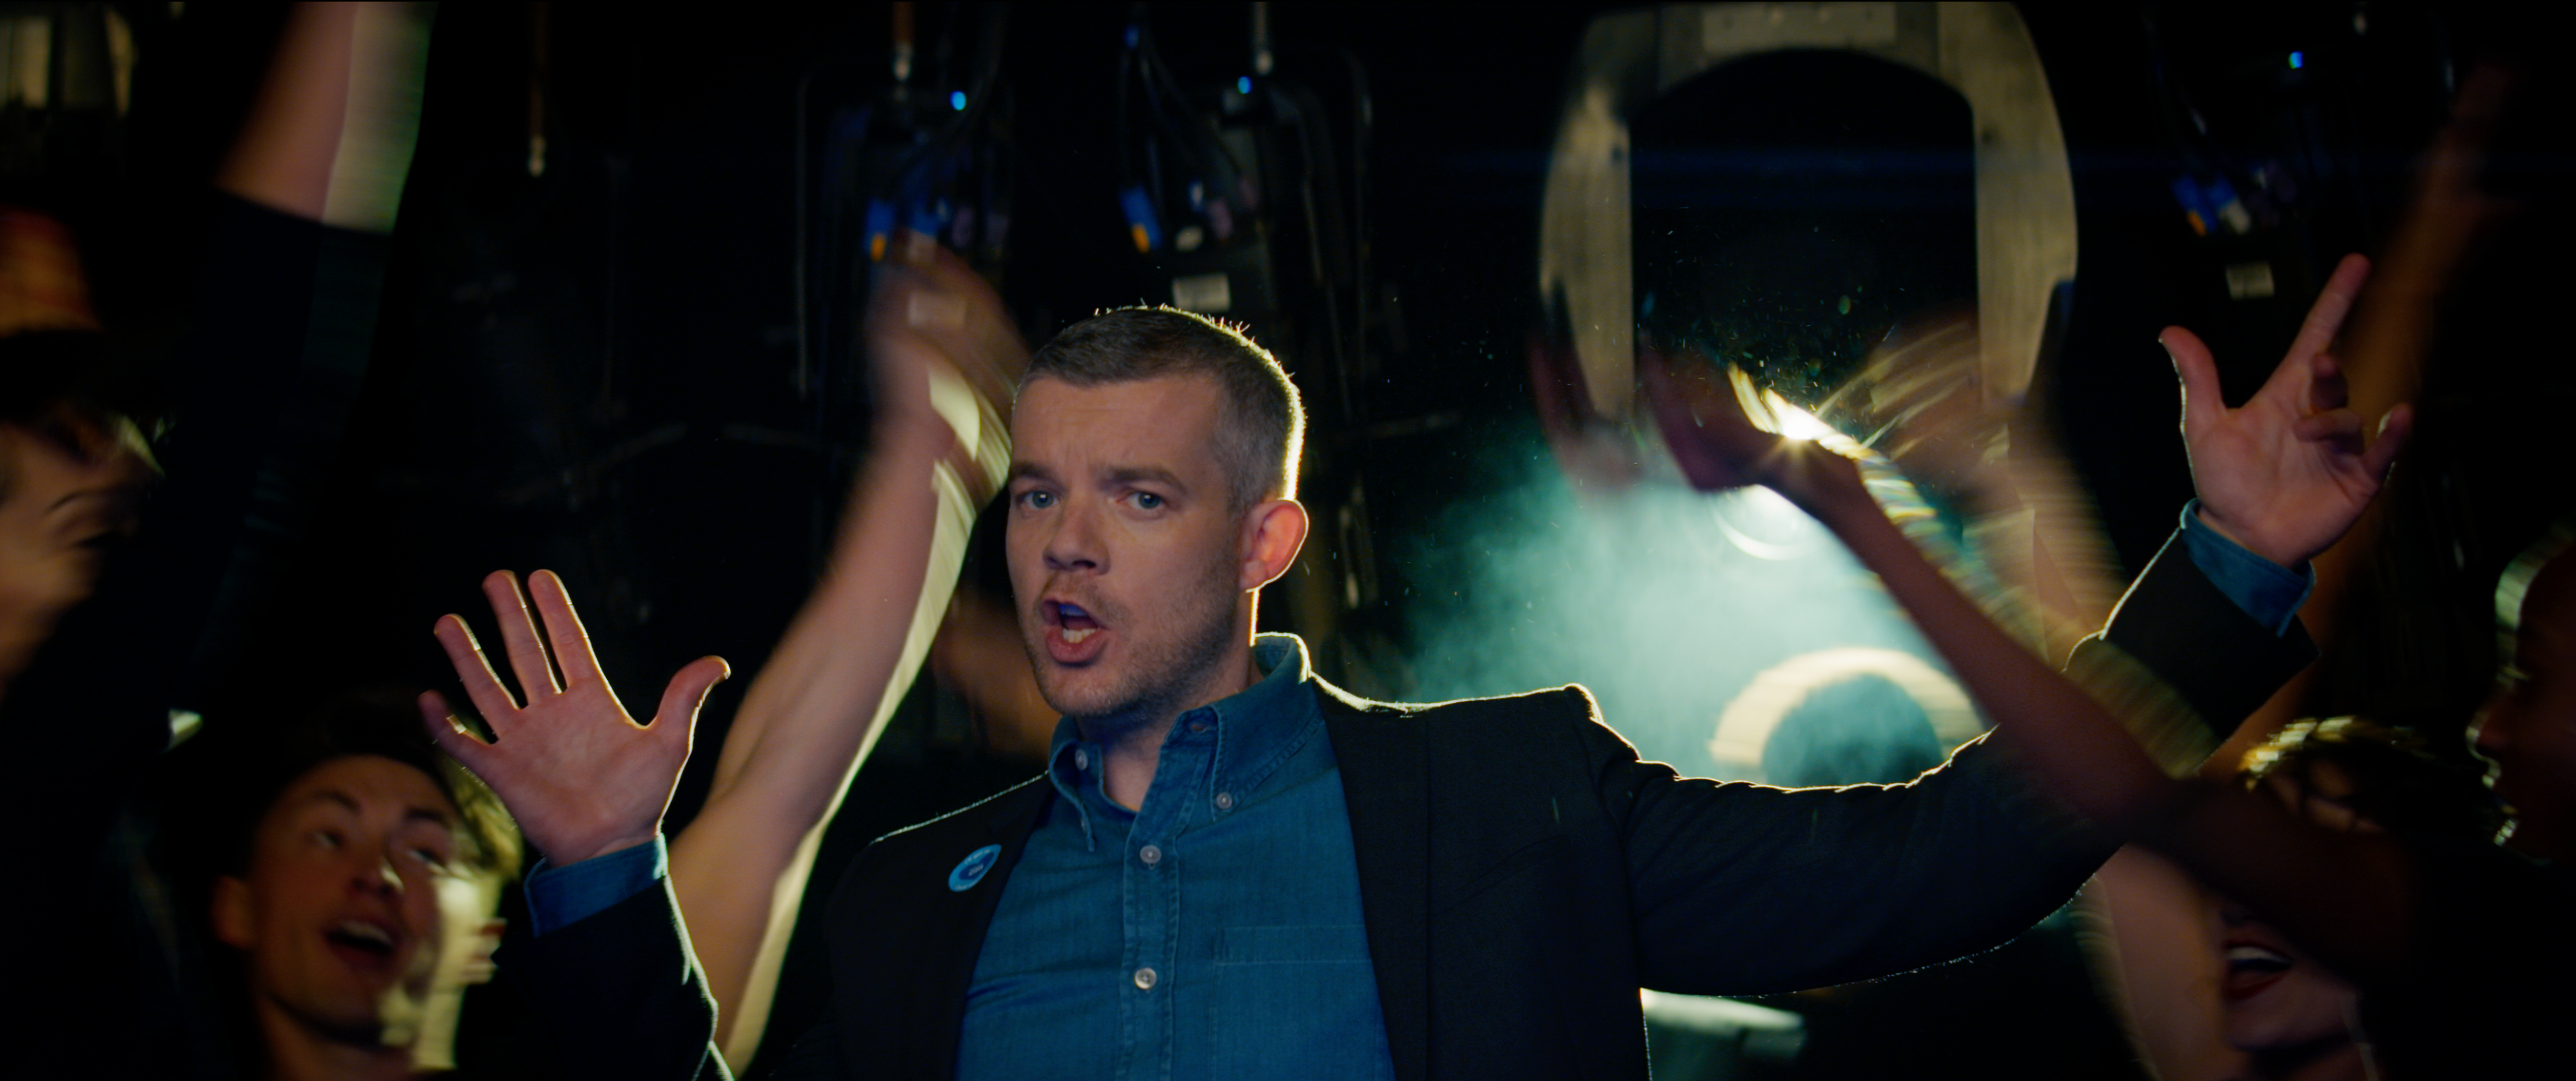 Russel Tovey appearing in film supporting COVID-19 vaccination programme.